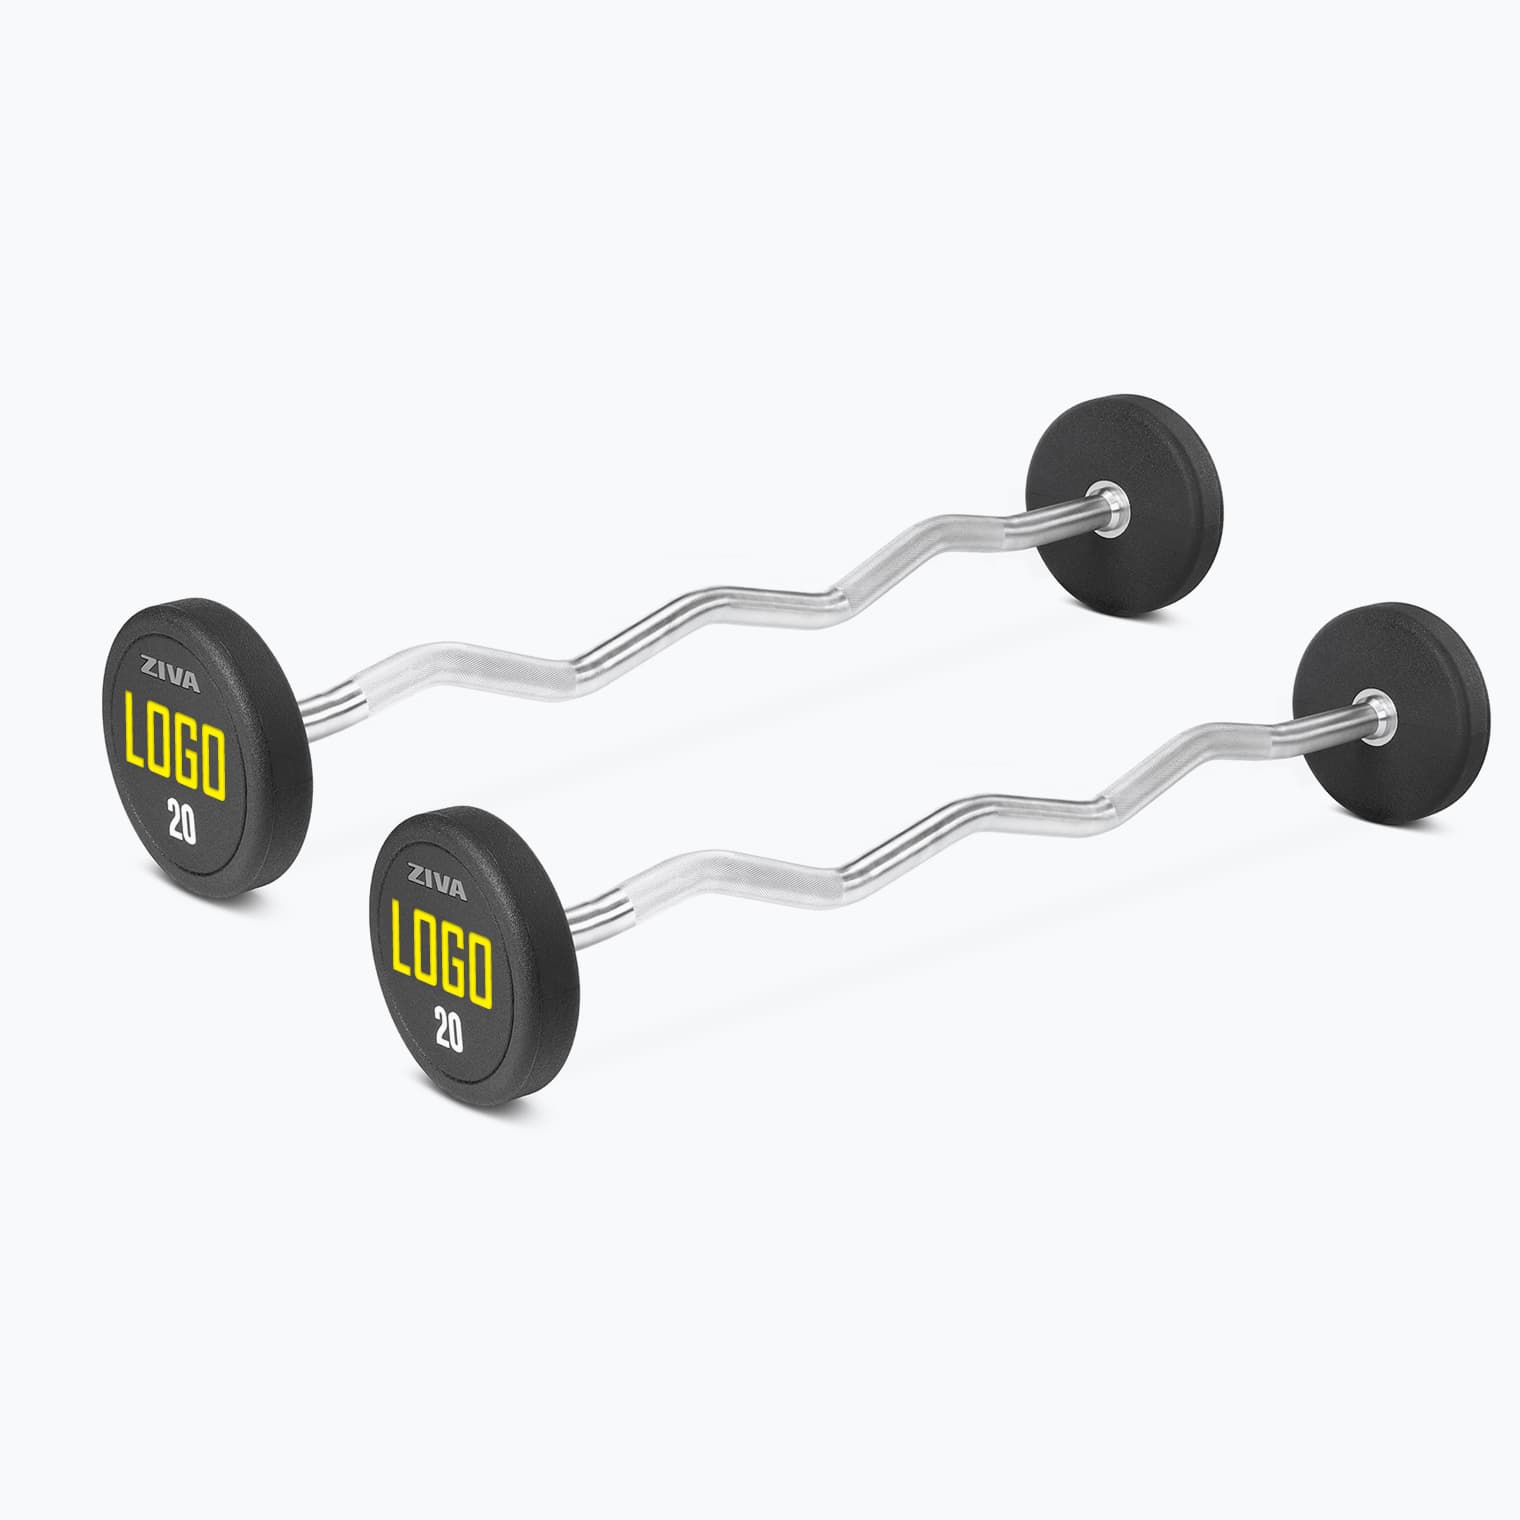 XP CUSTOMIZED URETHANE EZ CURL BARBELL SETS